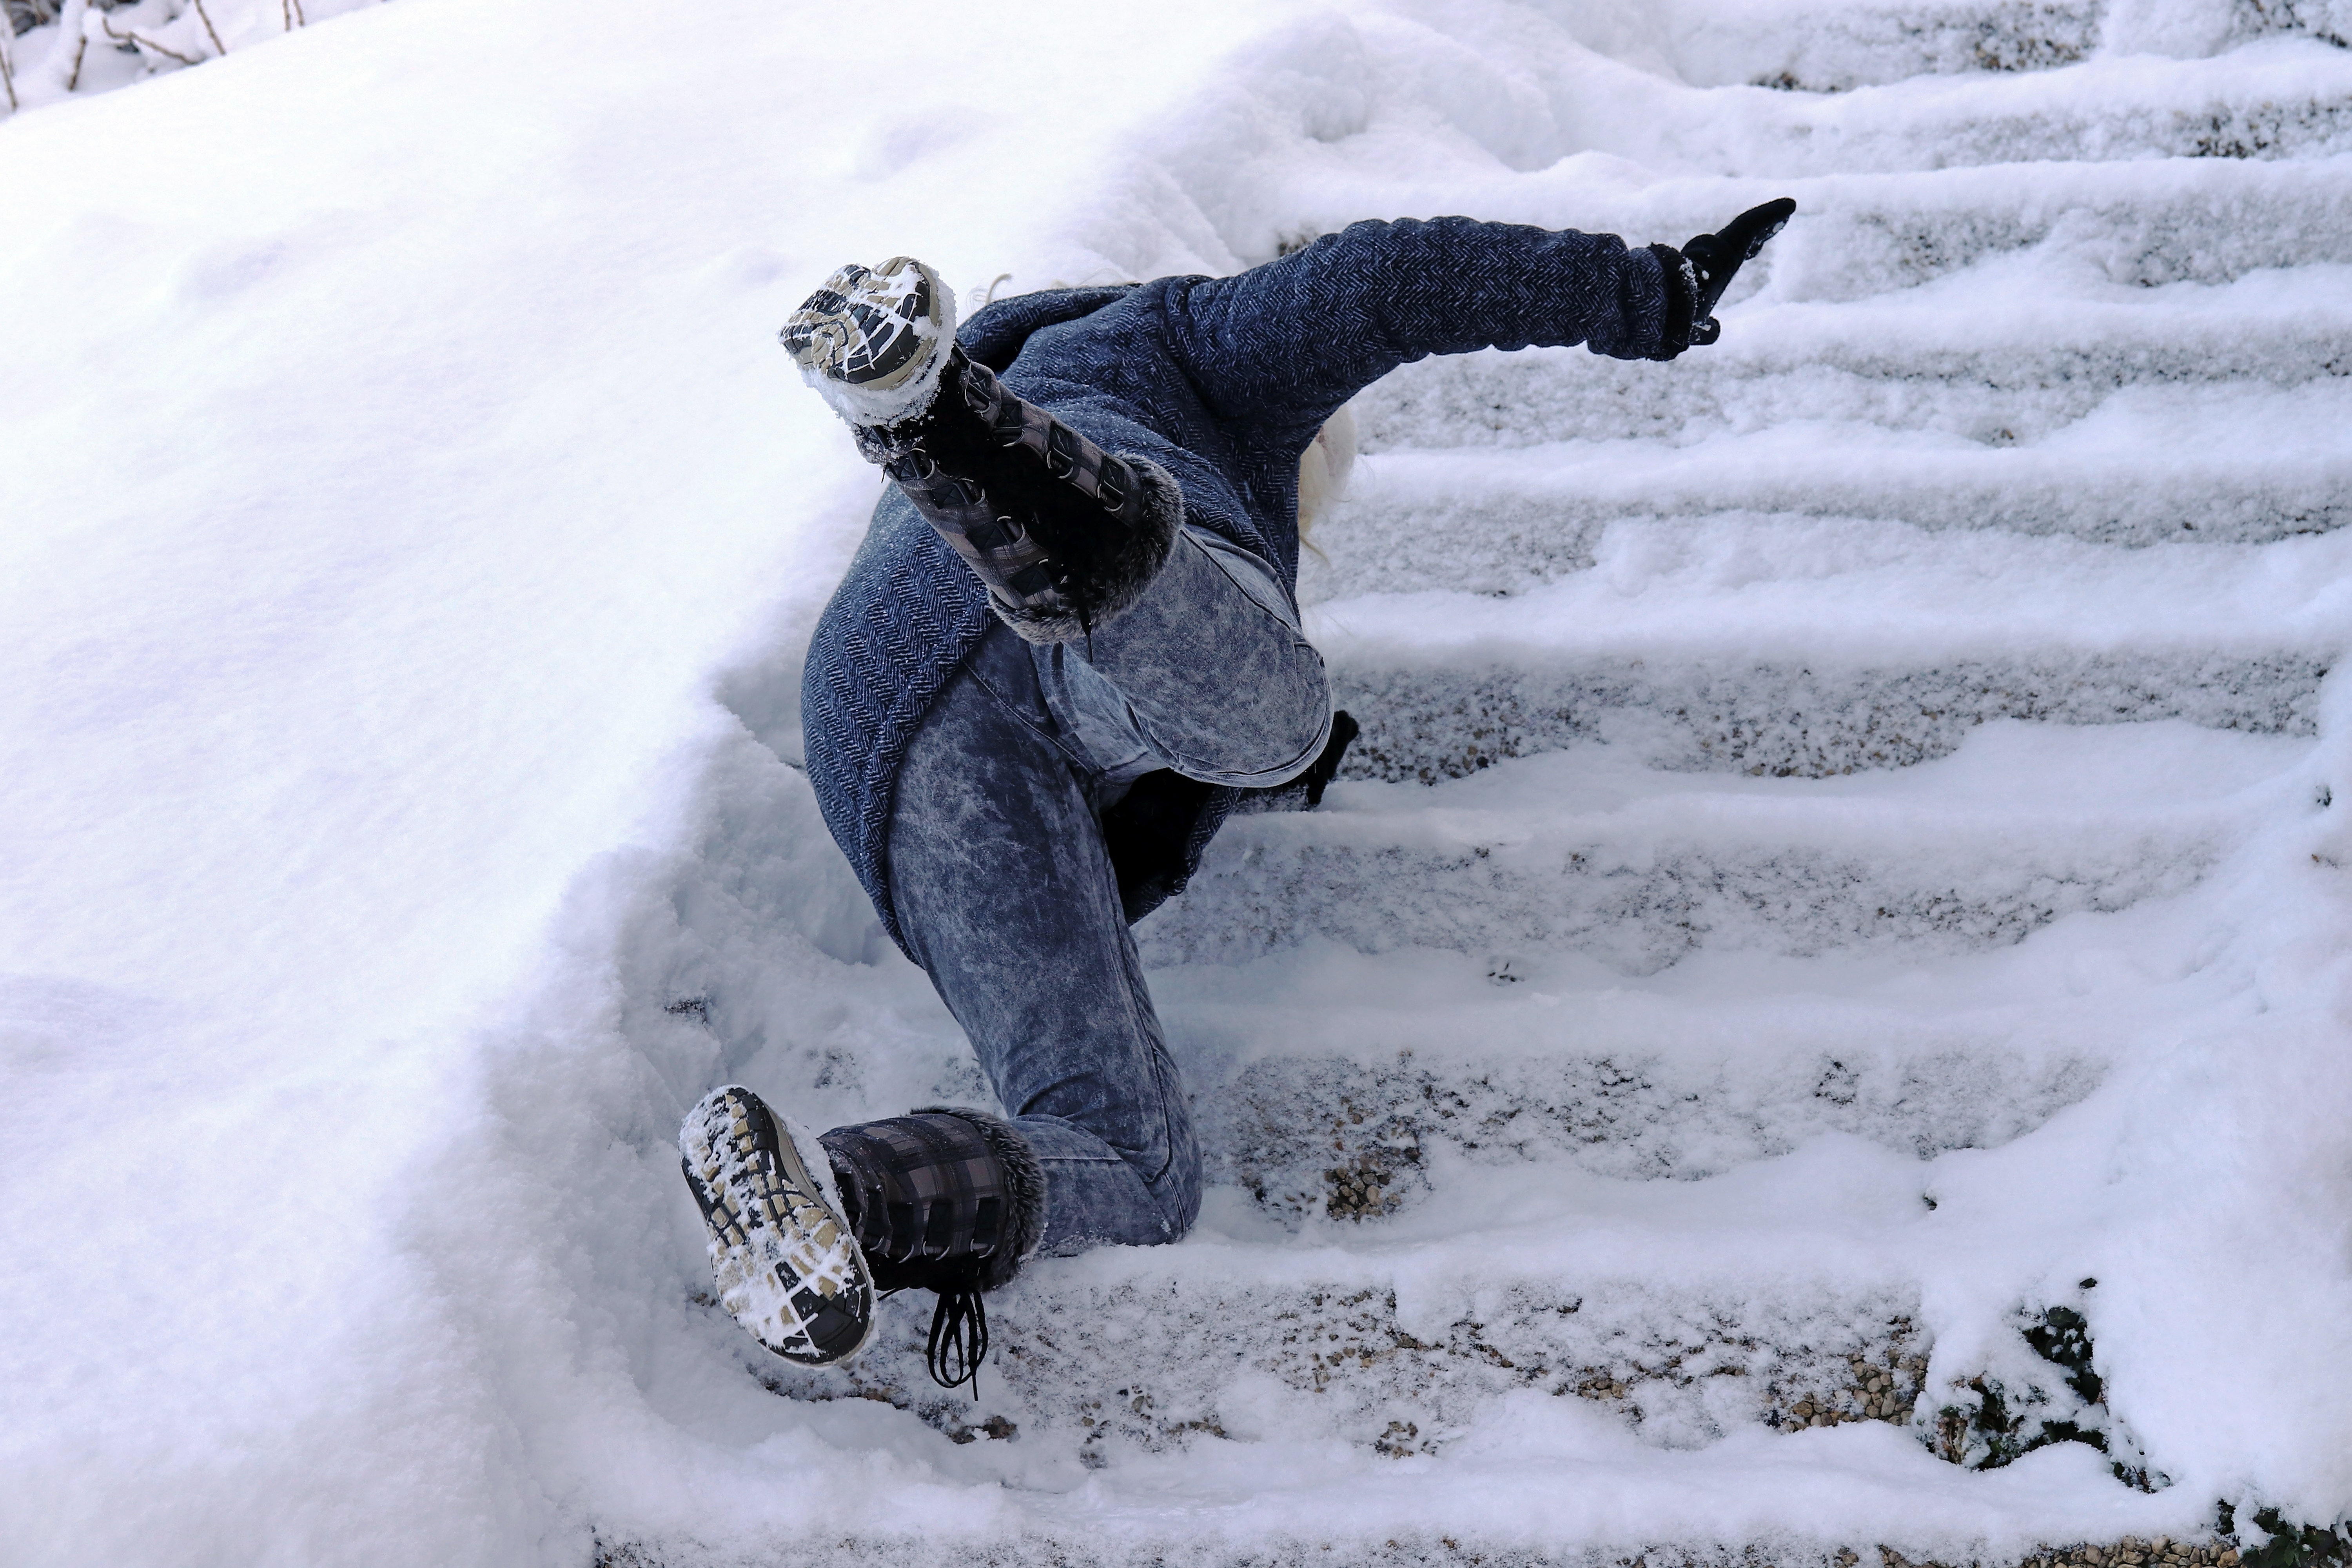 A woman slips and fell on a wintry staircase. Fall on smooth steps